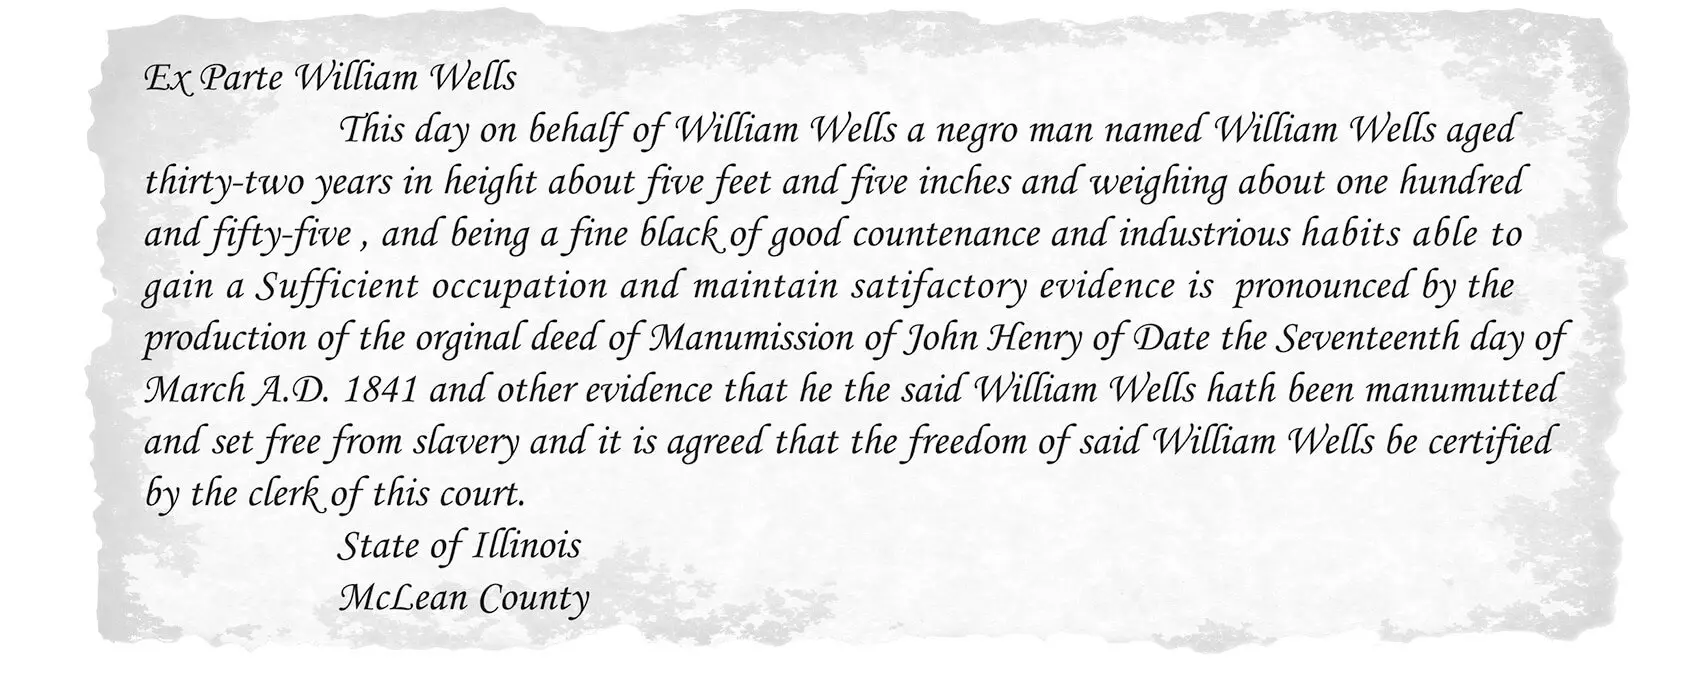 Ex Parte William Wells This day on behalf of William Wells a negro man named William Wells aged thirty-two years in height about five feet five inches and weighing about one hundred and fifty-five, and being a fine black of good countenance and industrious habits able to gain Sufficient occupation and maintain satisfactory evidence is pronounced by the production of the original deed of Manumission of John Henry of Date the Seventeenth day of March A.D. 1841 and other evidence that he the said William Wells hath been manumutted and set free from slavery and it is agreed that the freedom of said William Wells be certified by the clerk of this court. State of Illinois McLean County